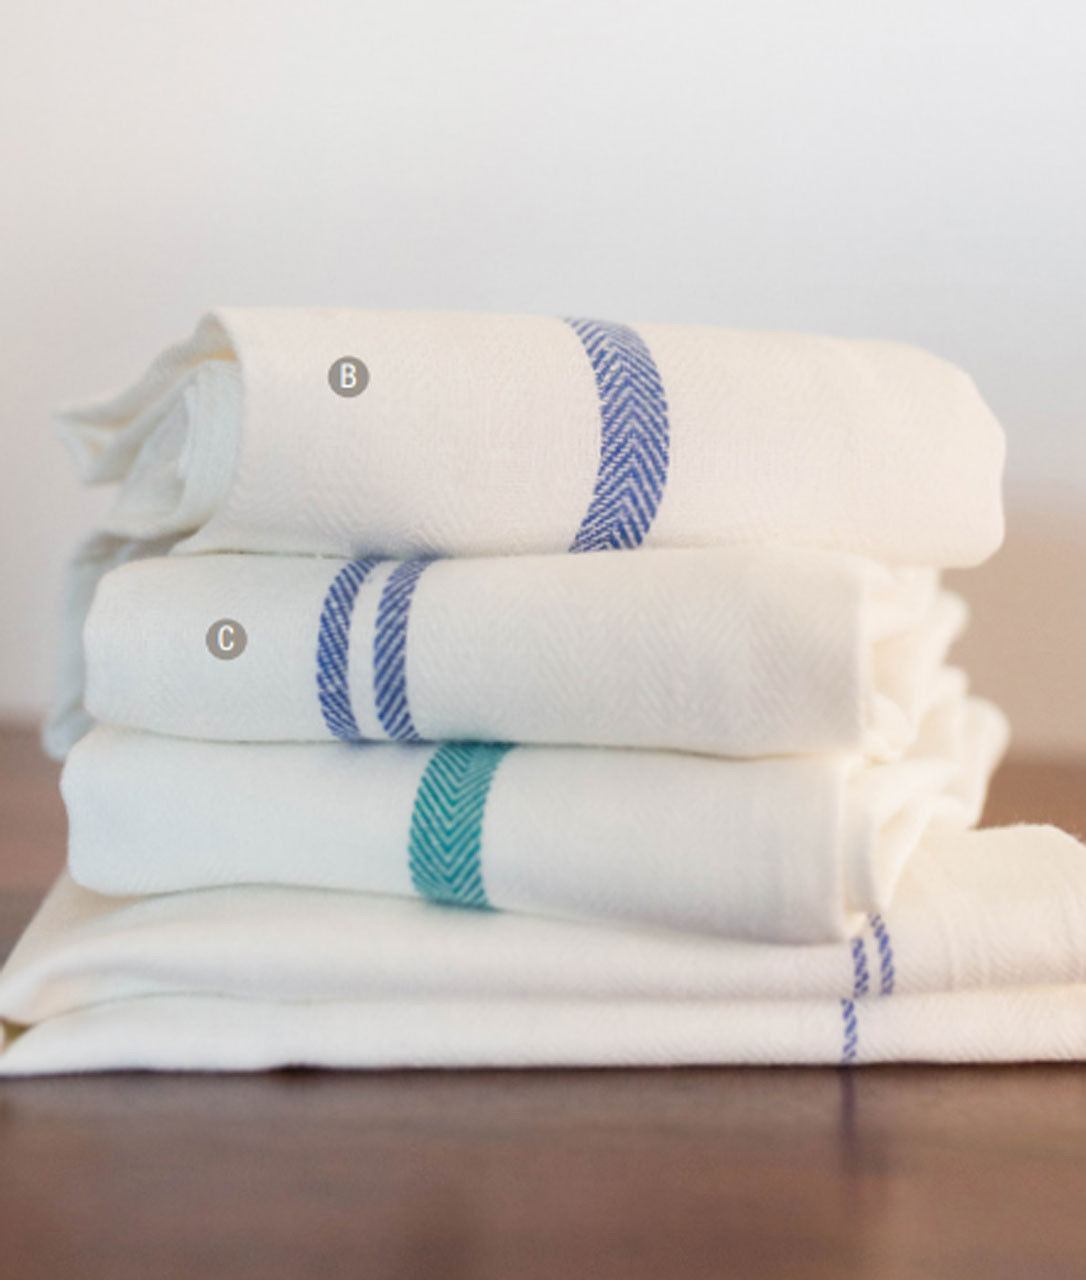 How many 100 percent cotton kitchen towels are in a case?